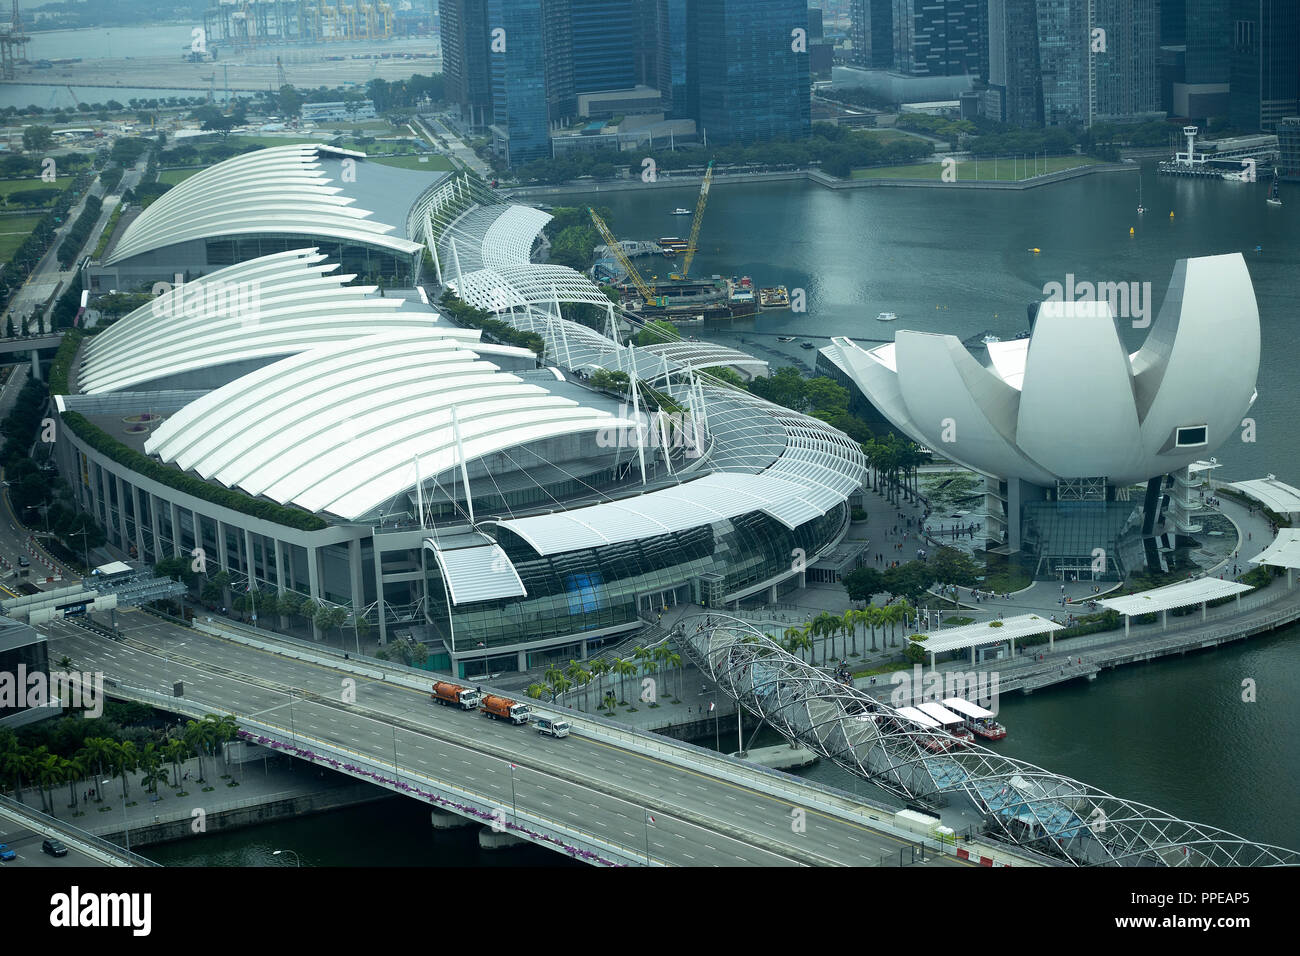 Aerial View of the Artscience Museum and The Shoppes at Marina Bay Sands with Singapore River and Marina Bay Waterfront Republic of Singapore Asia Stock Photo